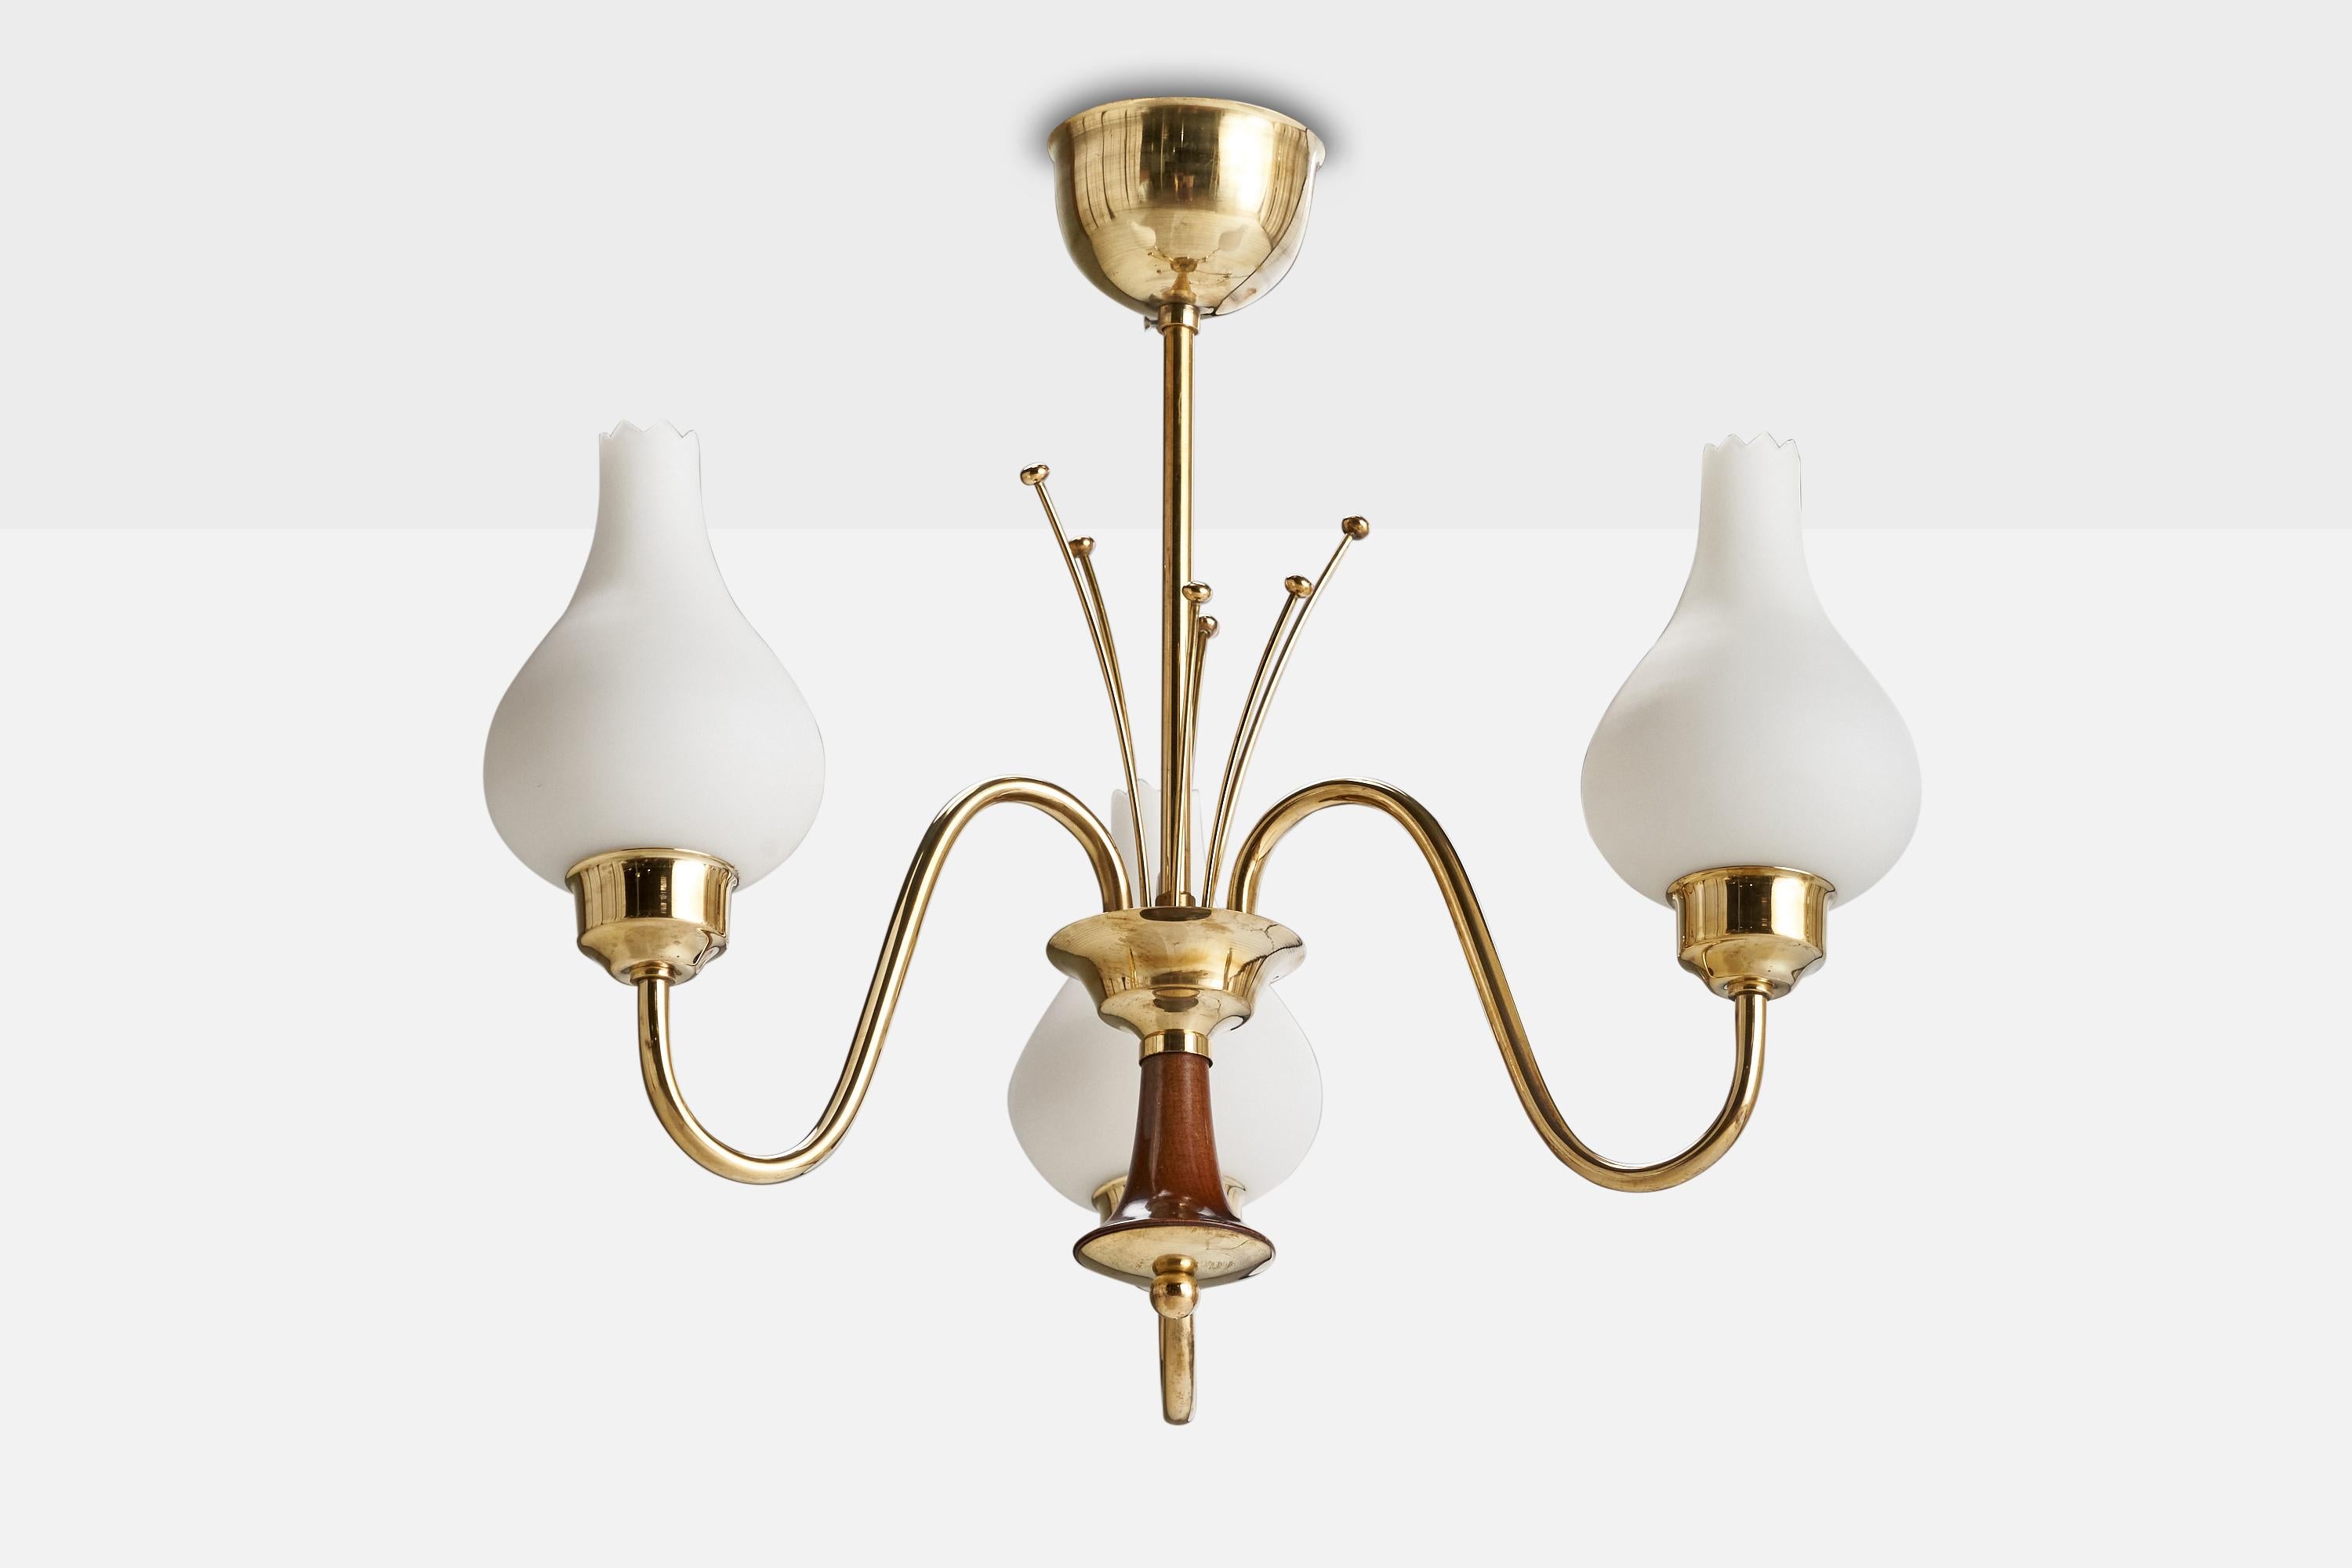 A brass, wood and opaline glass chandelier designed and produced in Sweden, 1950s.

Dimensions of canopy (inches): 3.54” H x 2.5” Diameter
Socket takes standard E-14 bulbs. 3 socket.There is no maximum wattage stated on the fixture. All lighting